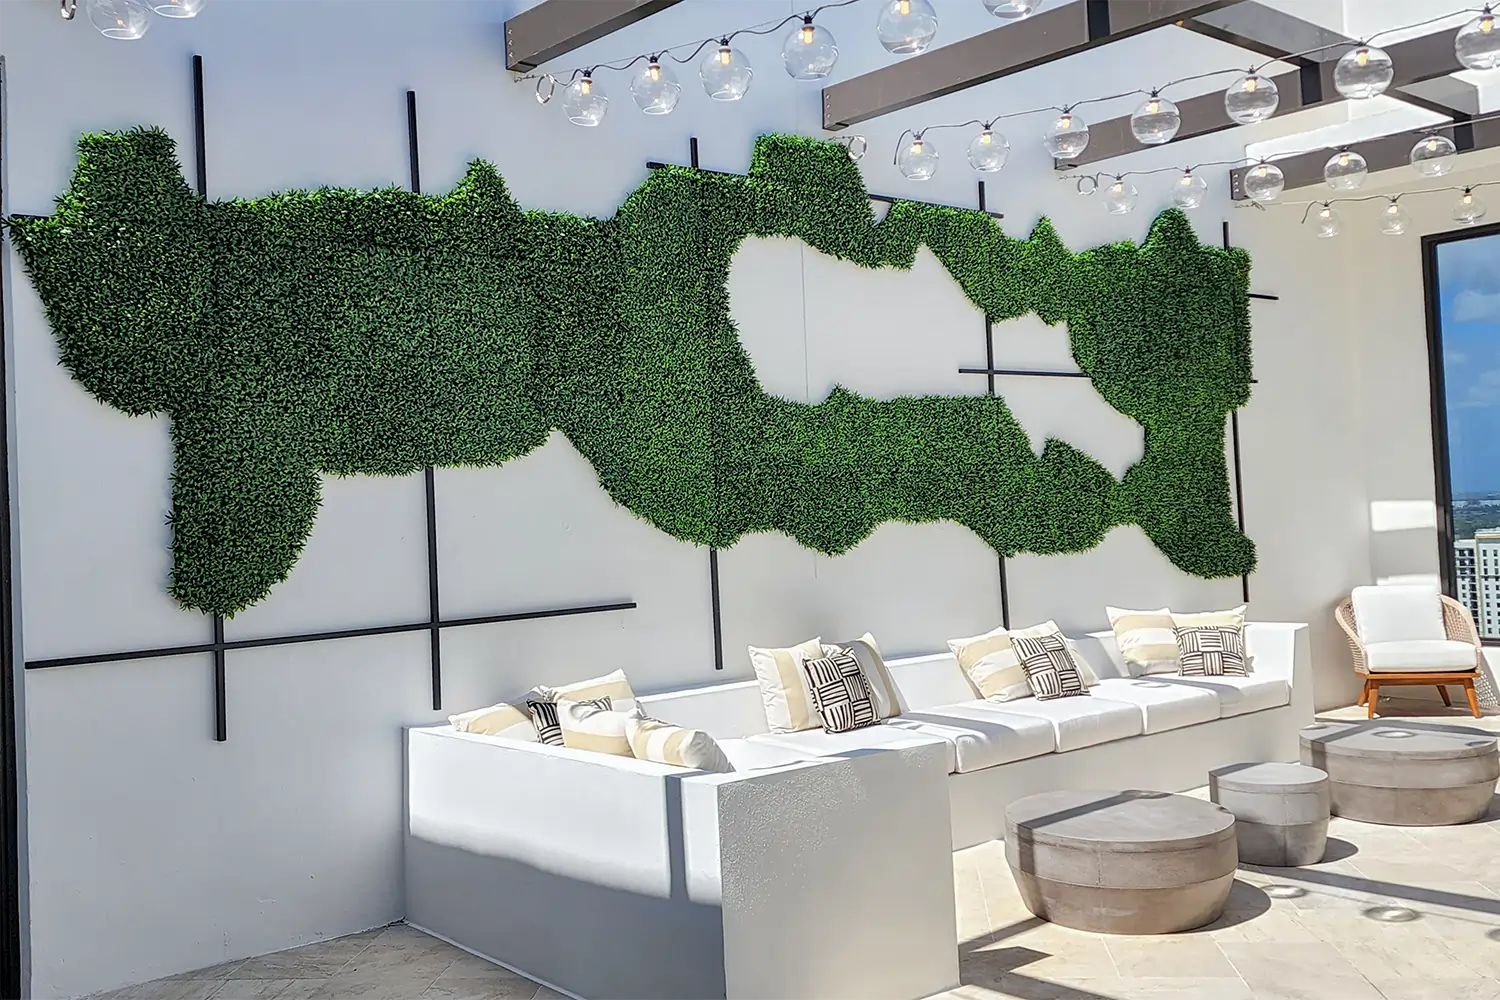 Artificial living wall in cooperate break area